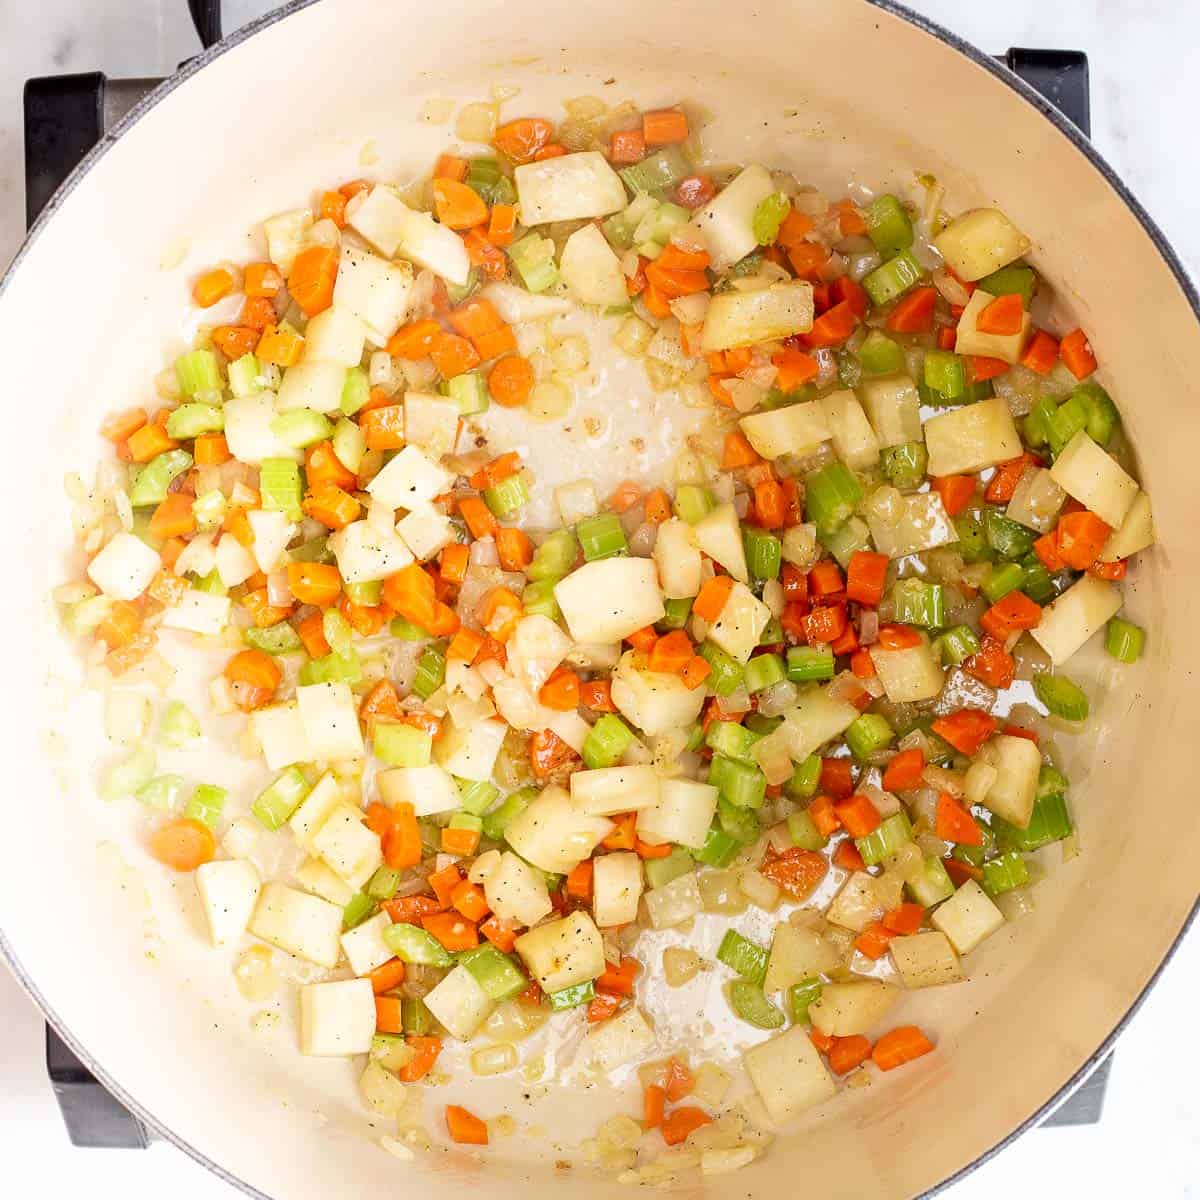 Image showing vegetables being sauteed in a dutch oven.